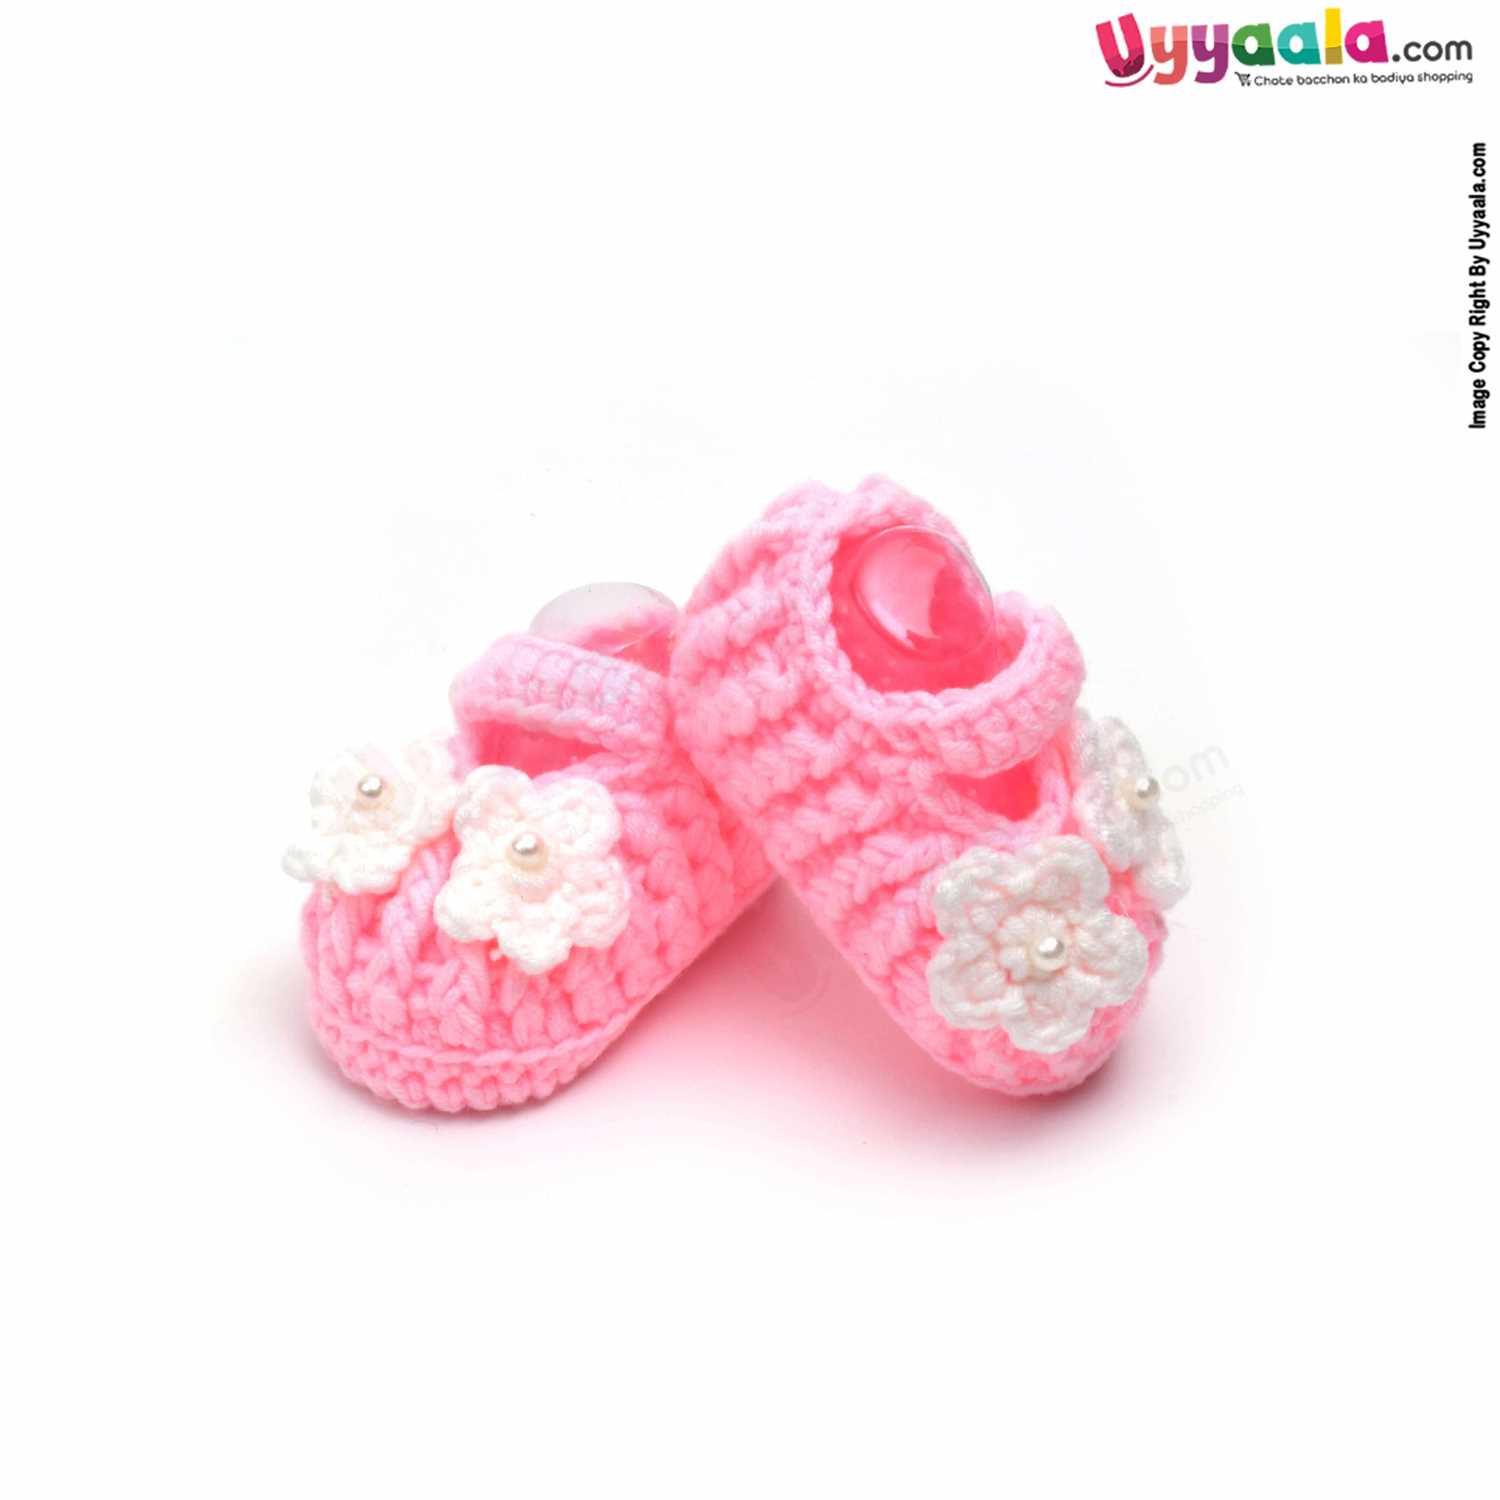 Woolen Hand Knitted Socks for New Born 0-6m Age - Pink